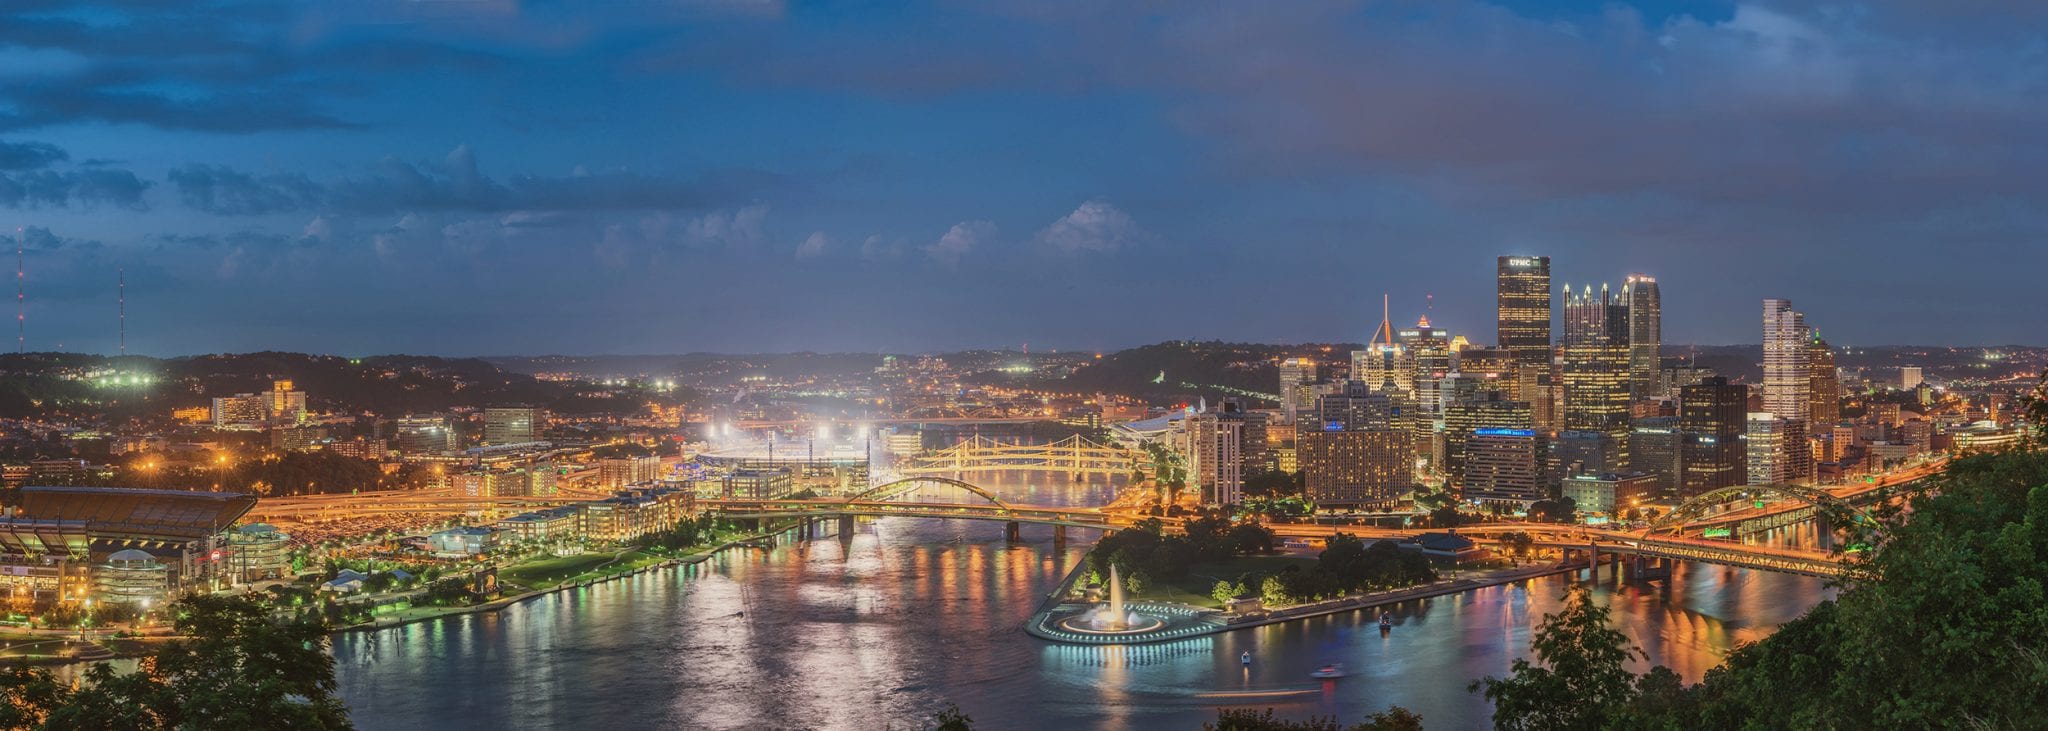 Panorama of Pittsburgh during the blue hour from Mt. Washington -- DAVE DICELLO / Used under license